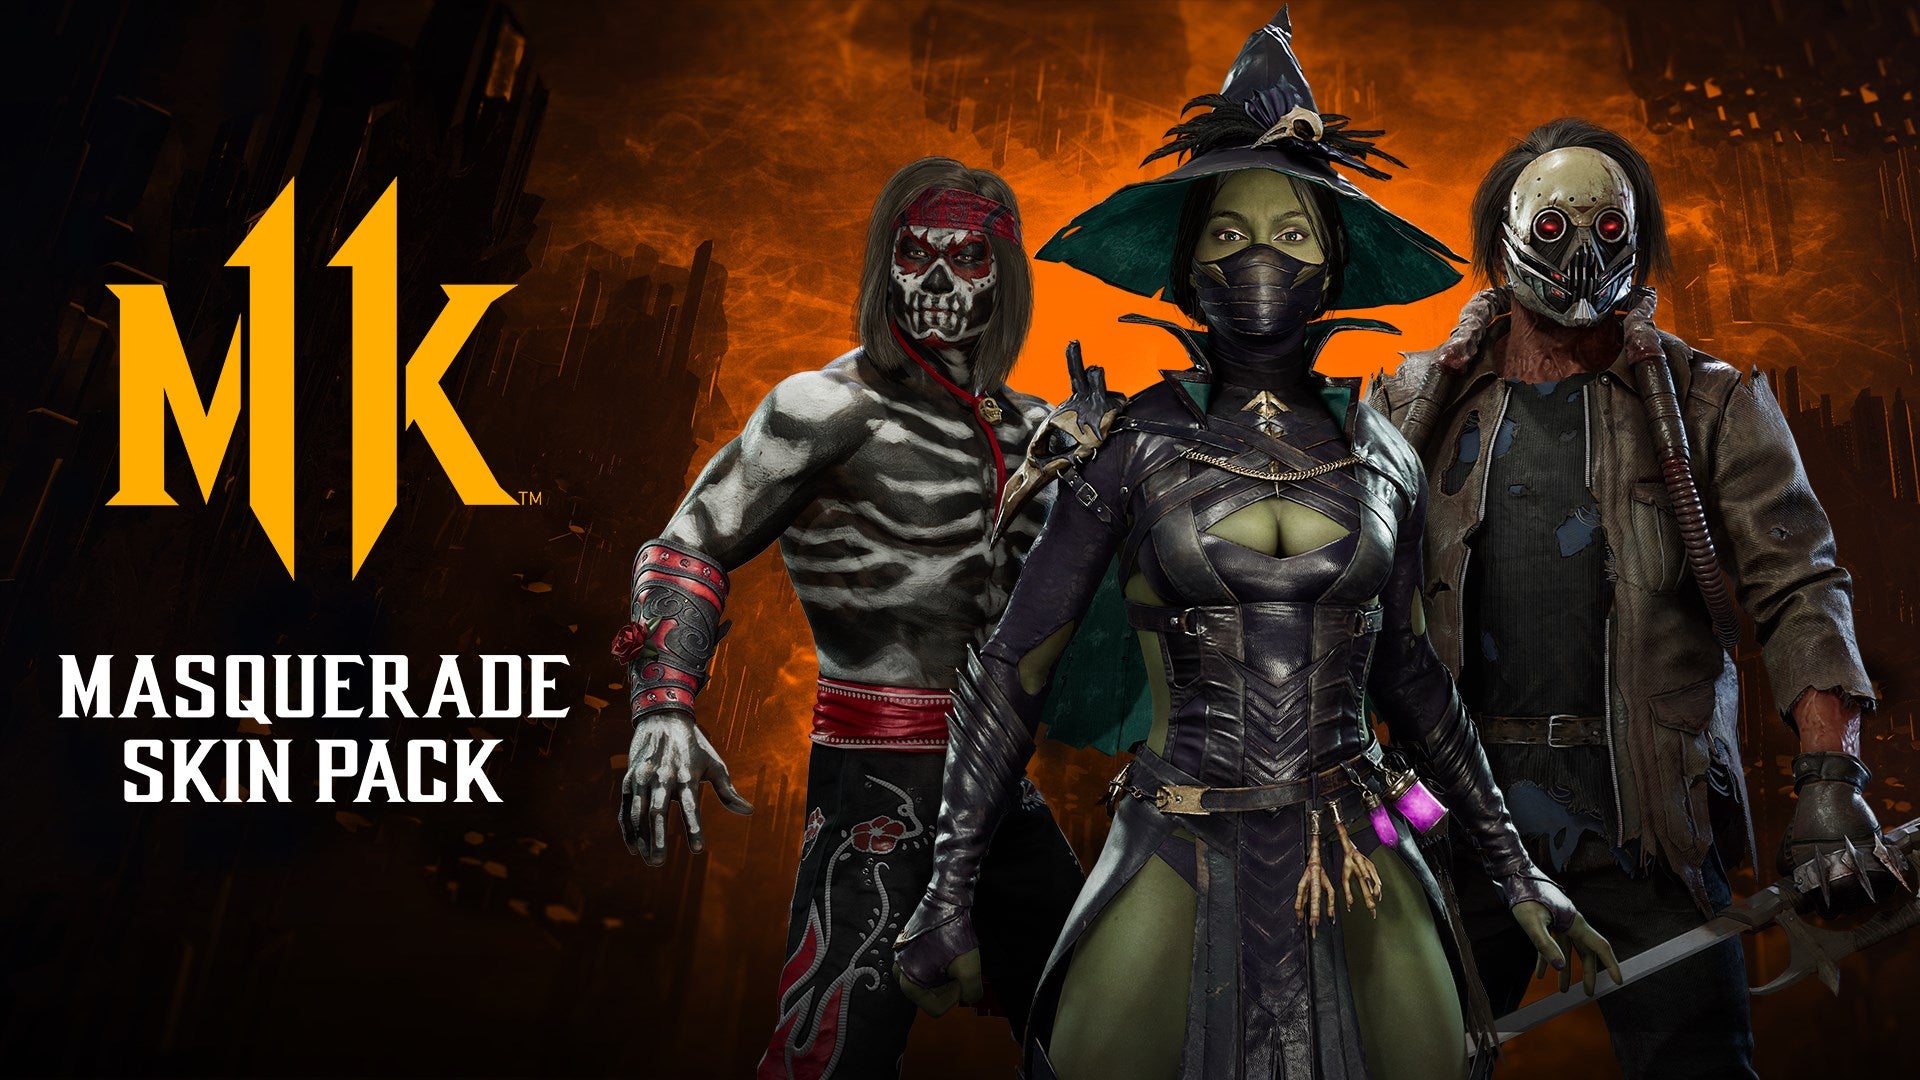 Image for Halloween is coming to Mortal Kombat 11 with spooky new skins